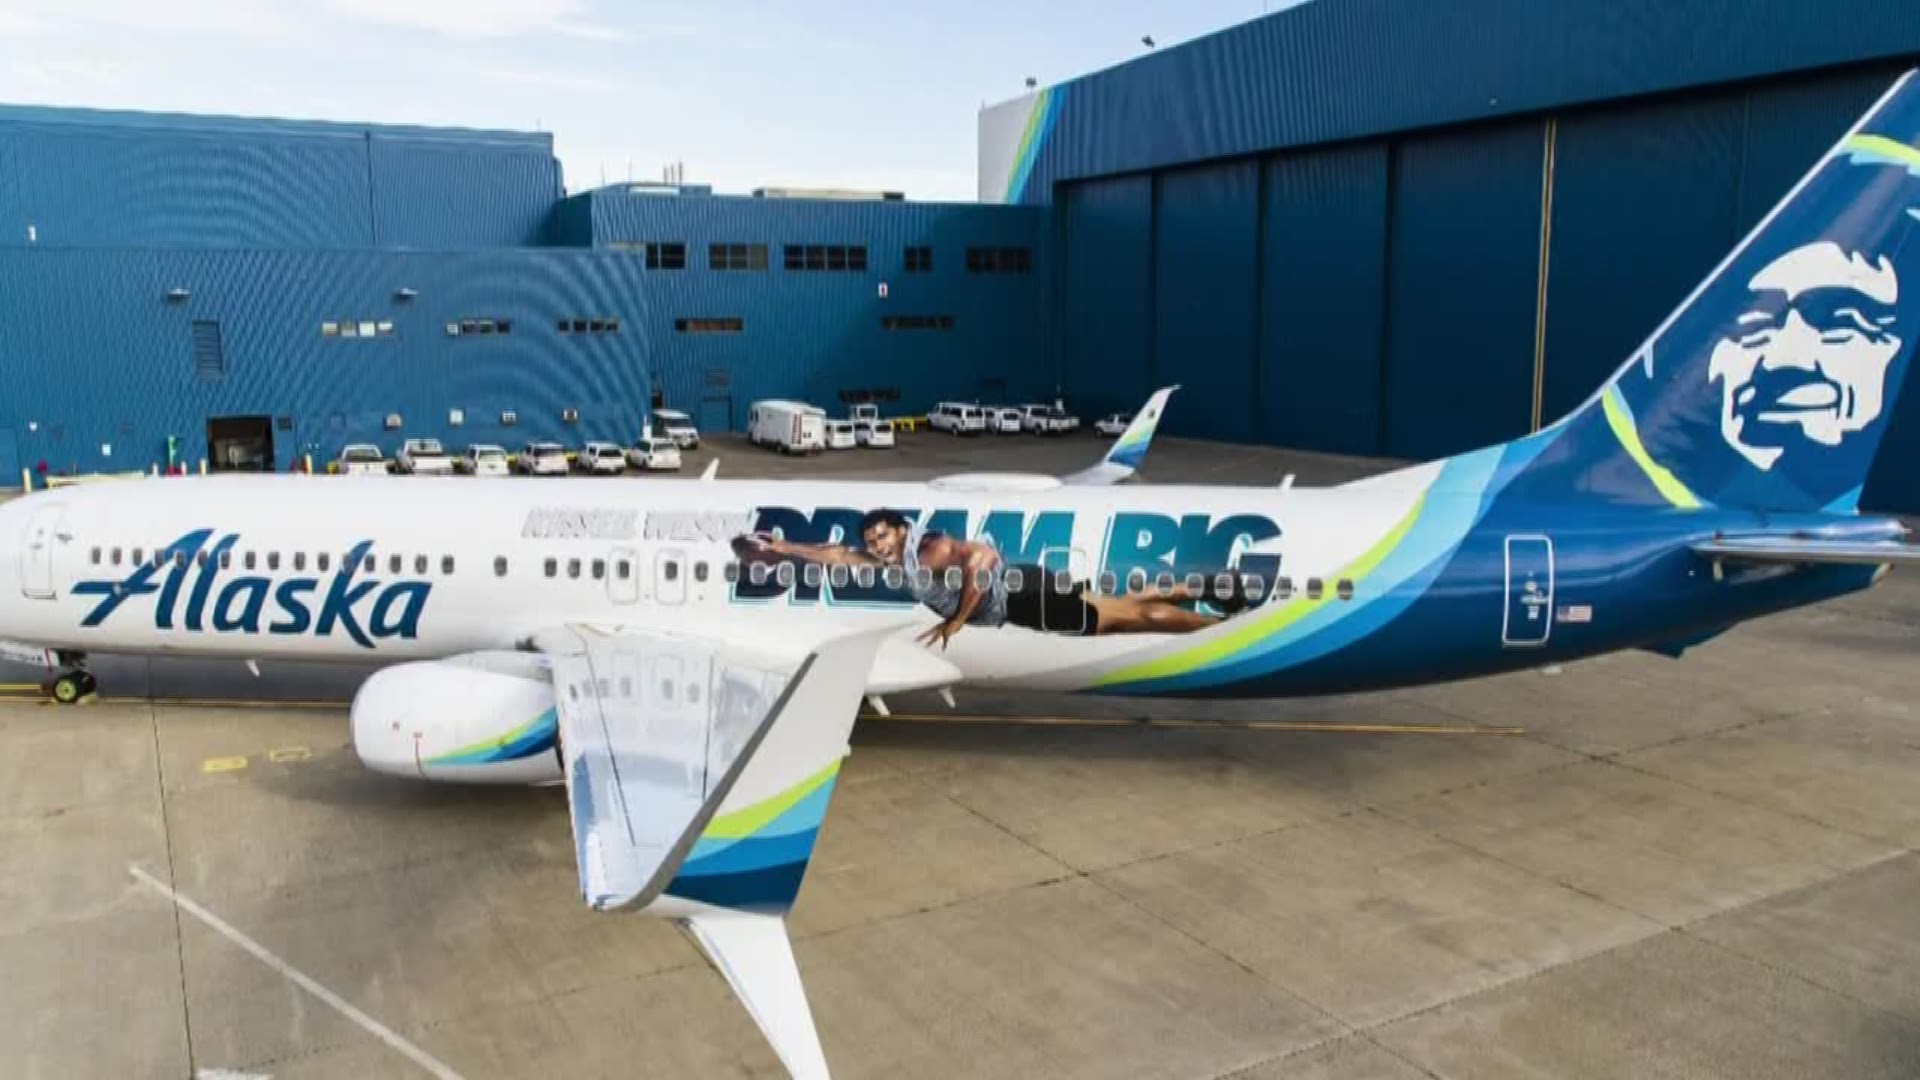 Fans headed to the Seahawks game in Pittsburgh will be doing so on the new Russell Wilson-branded plane for Alaska Airlines.